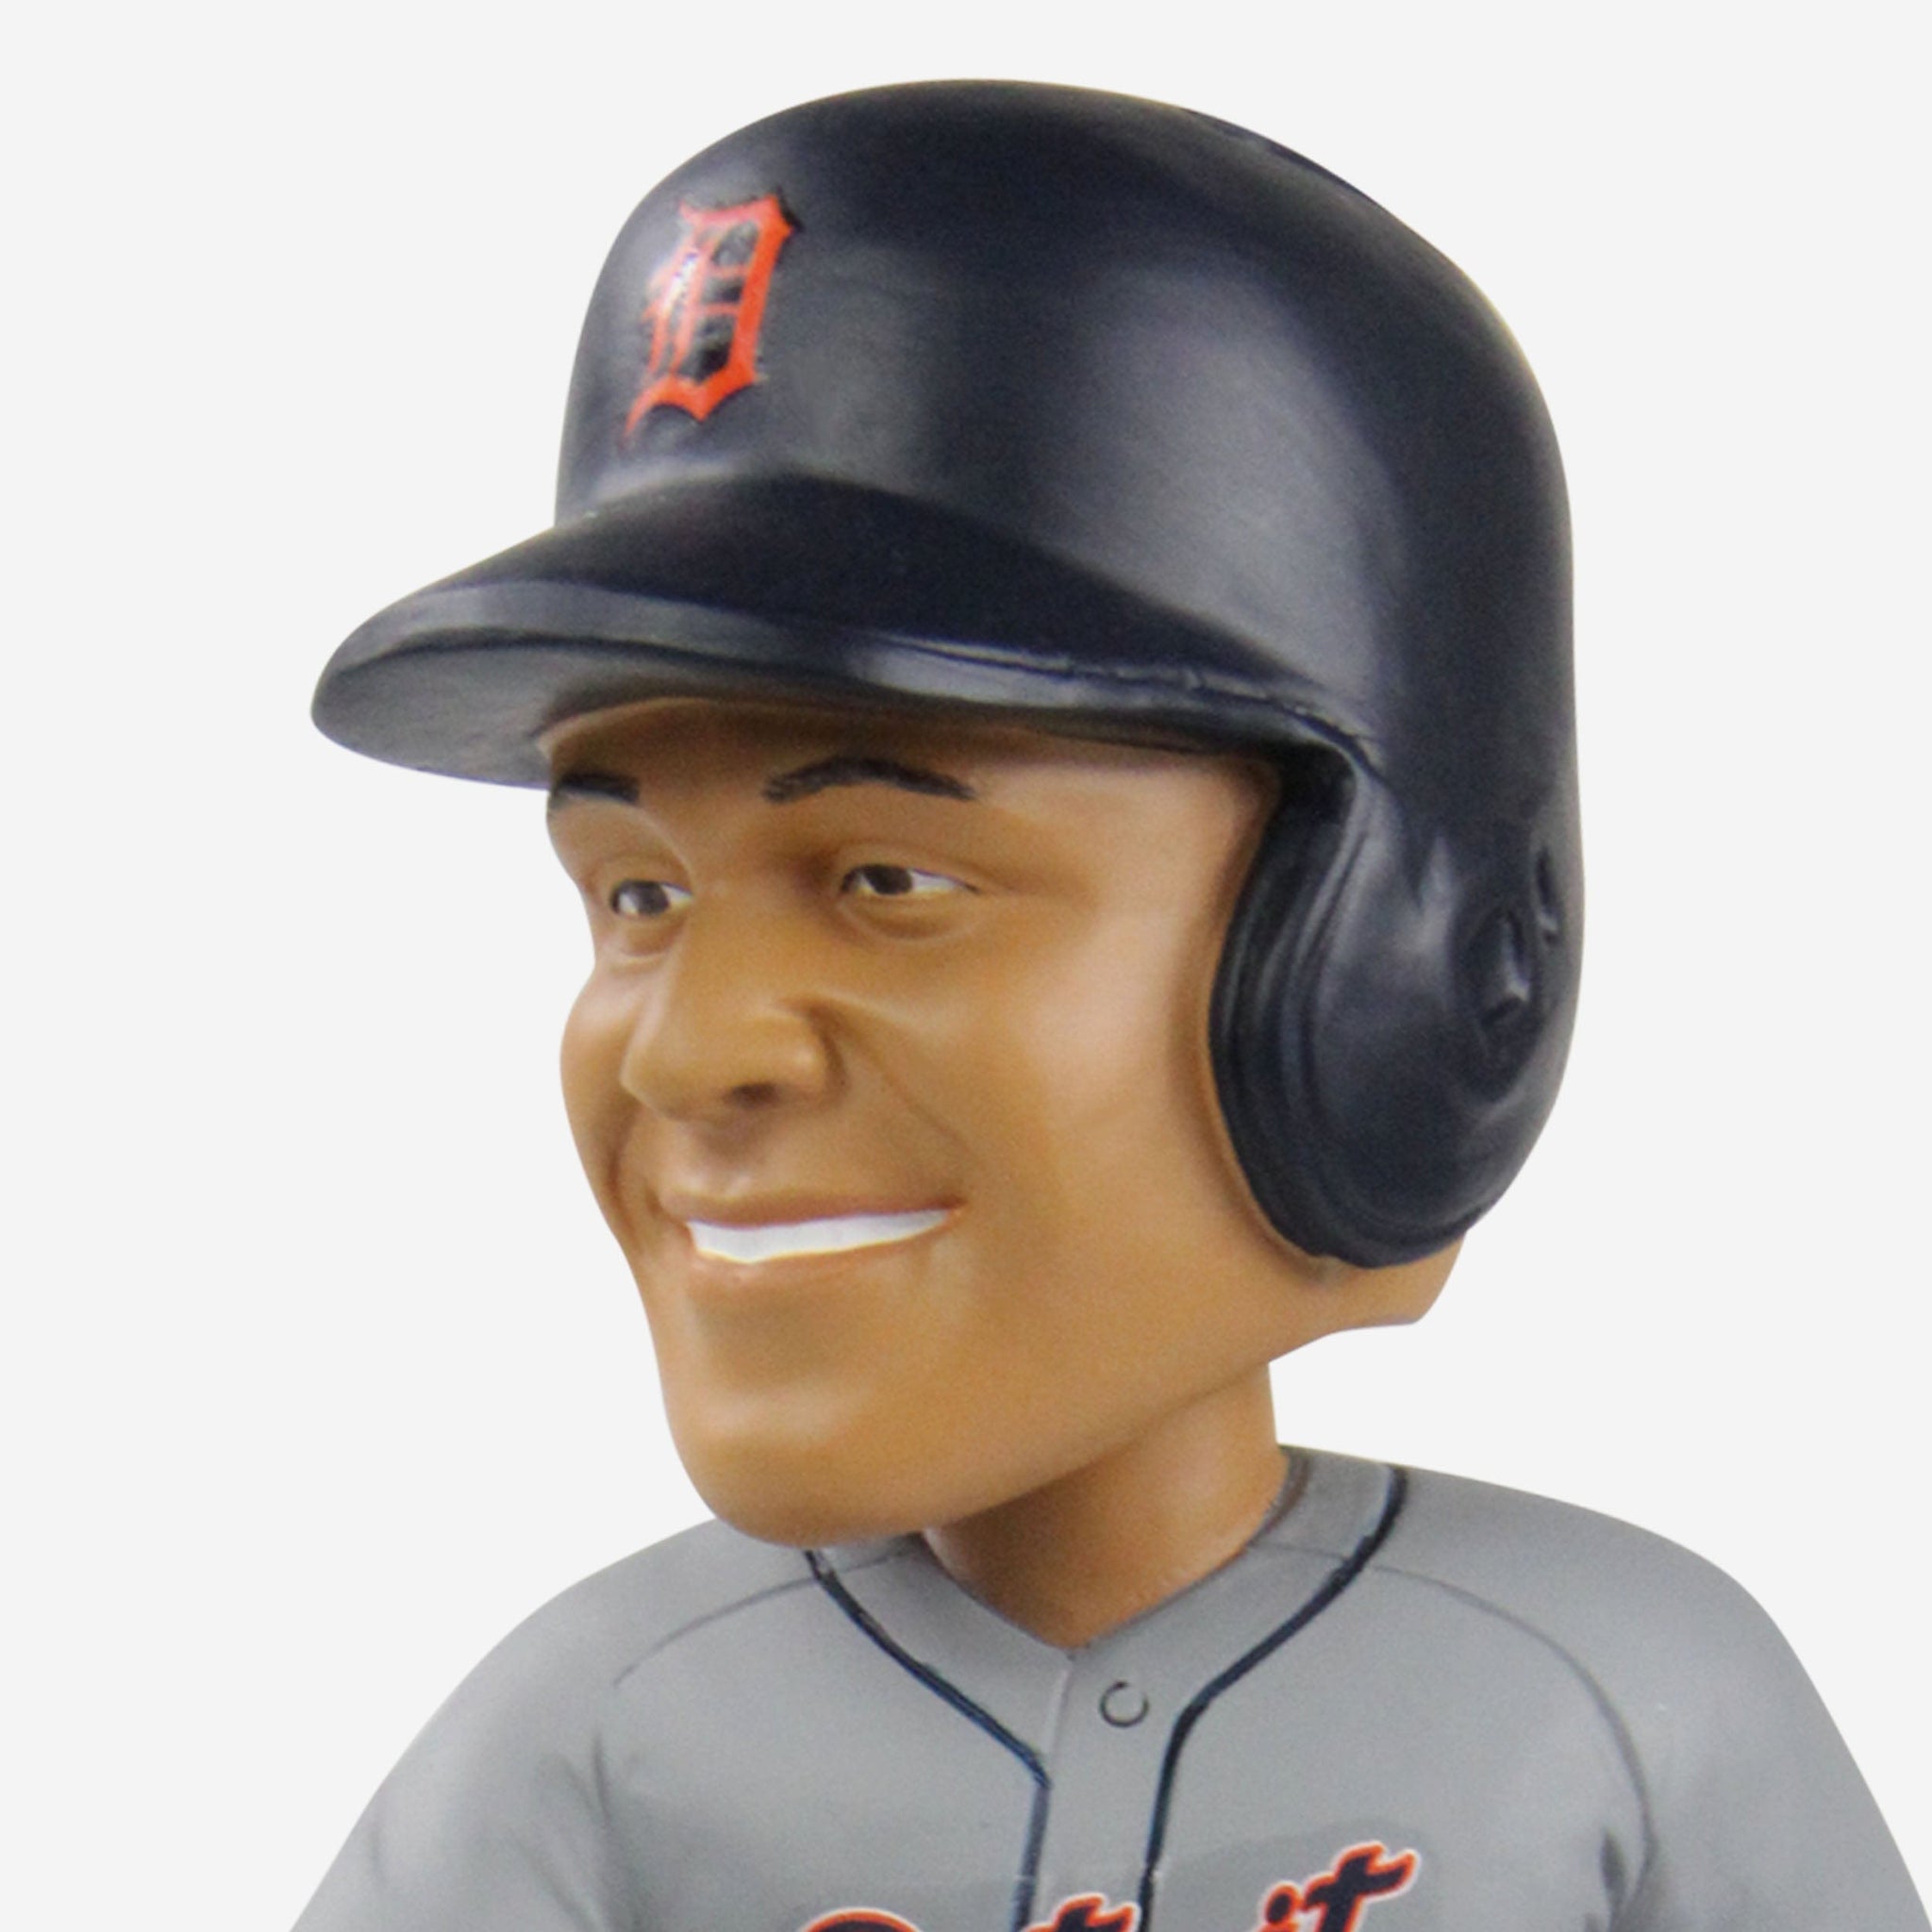 Miguel Cabrera Detroit Tigers 2012 Triple Crown Bobblehead Officially Licensed by MLB